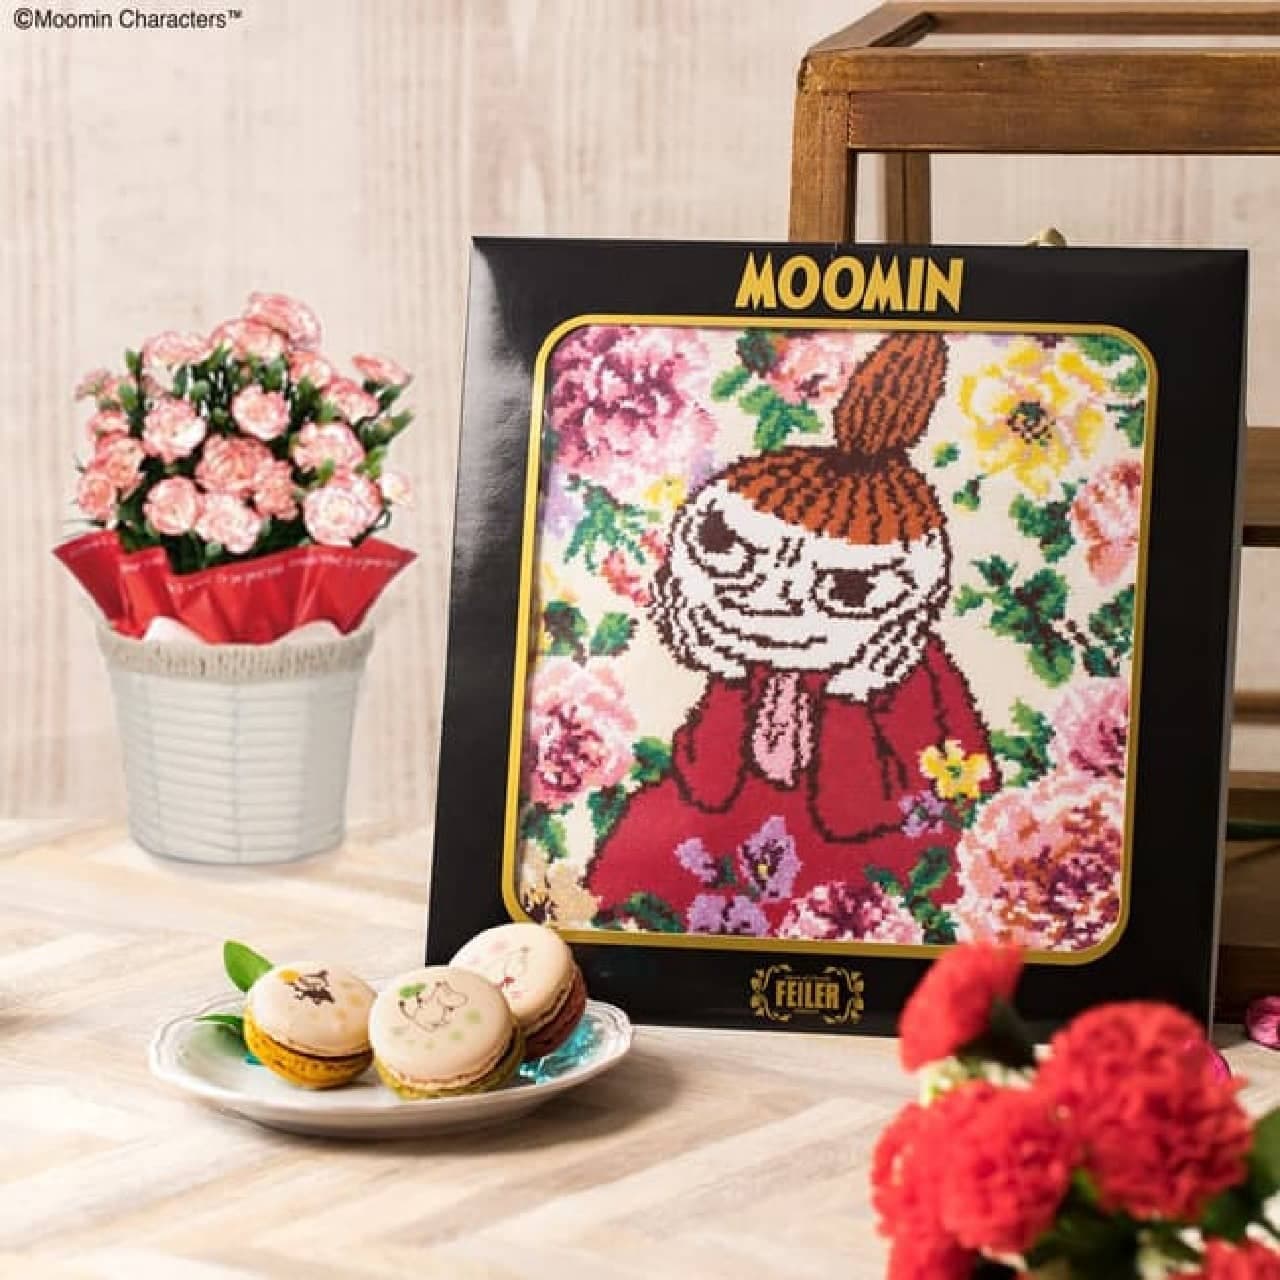 MOOMIN SHOP Mother's Day Shipping Gift -- Moomin Little Mii x Carnations! Gorgeous macaroon sets are also available.